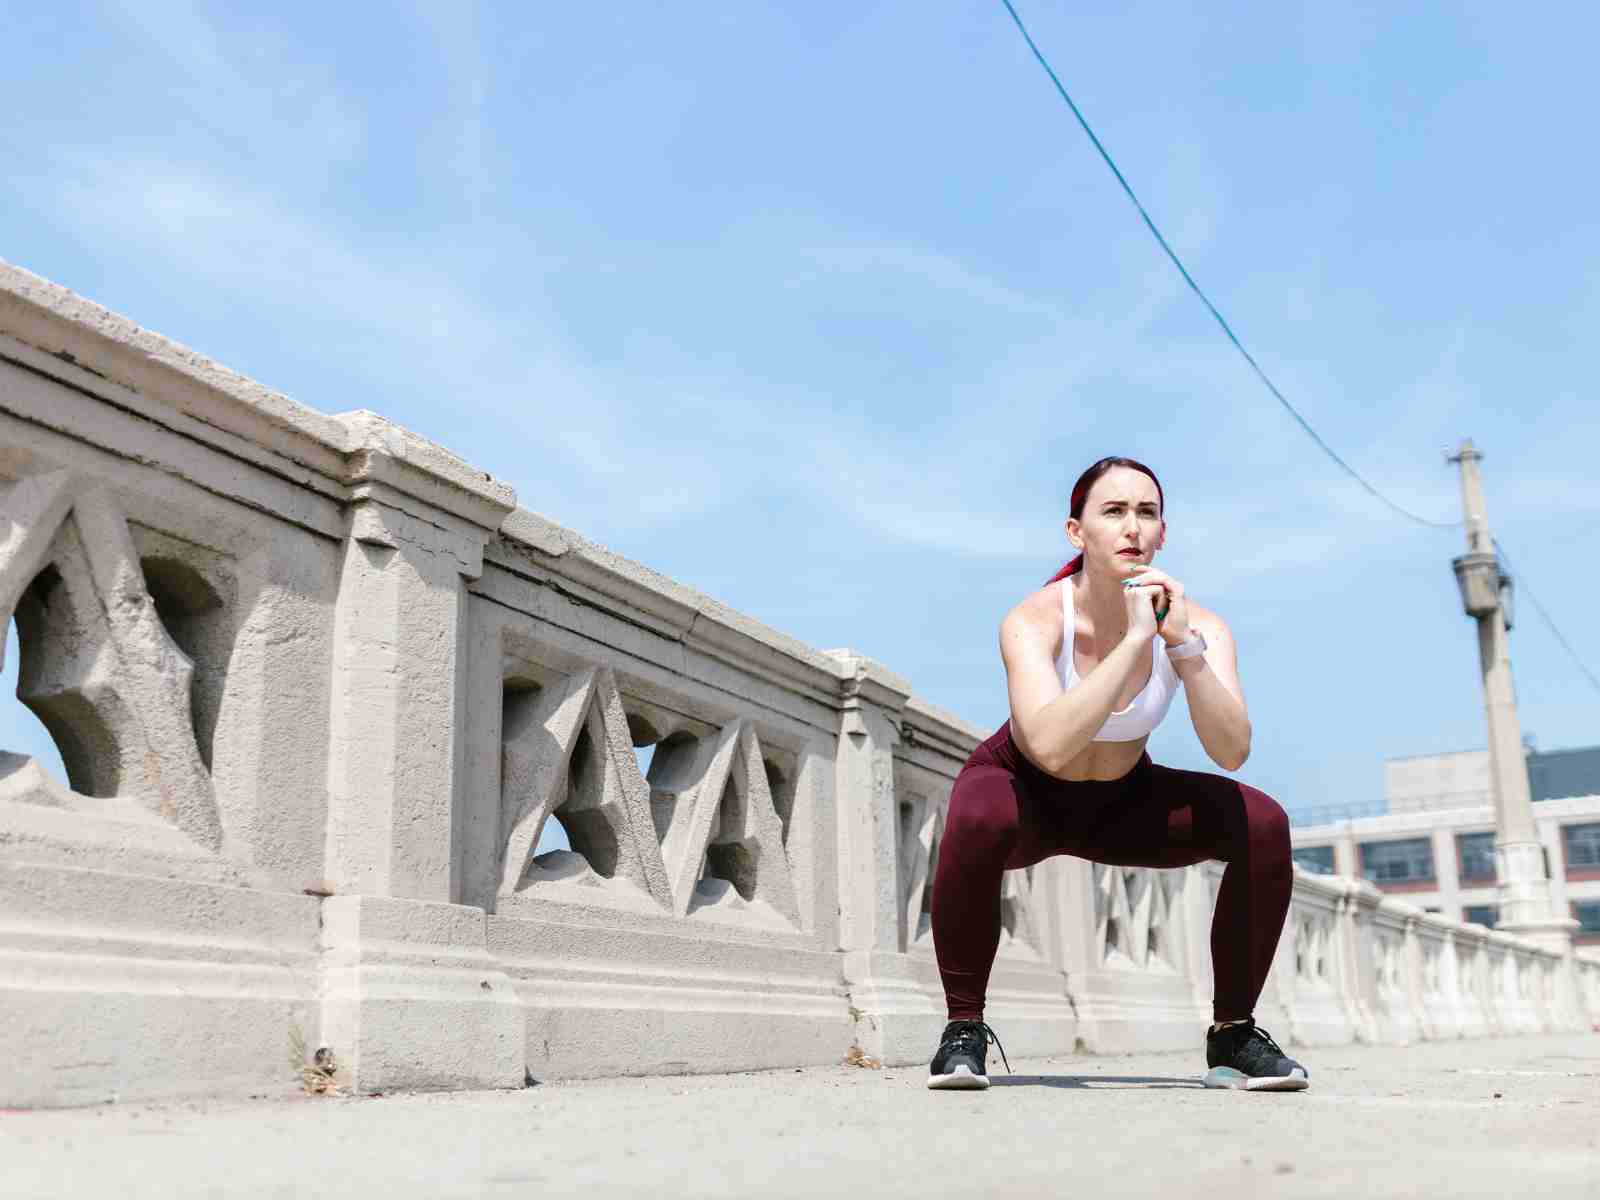 squat is an essential calisthenics workout for beginners